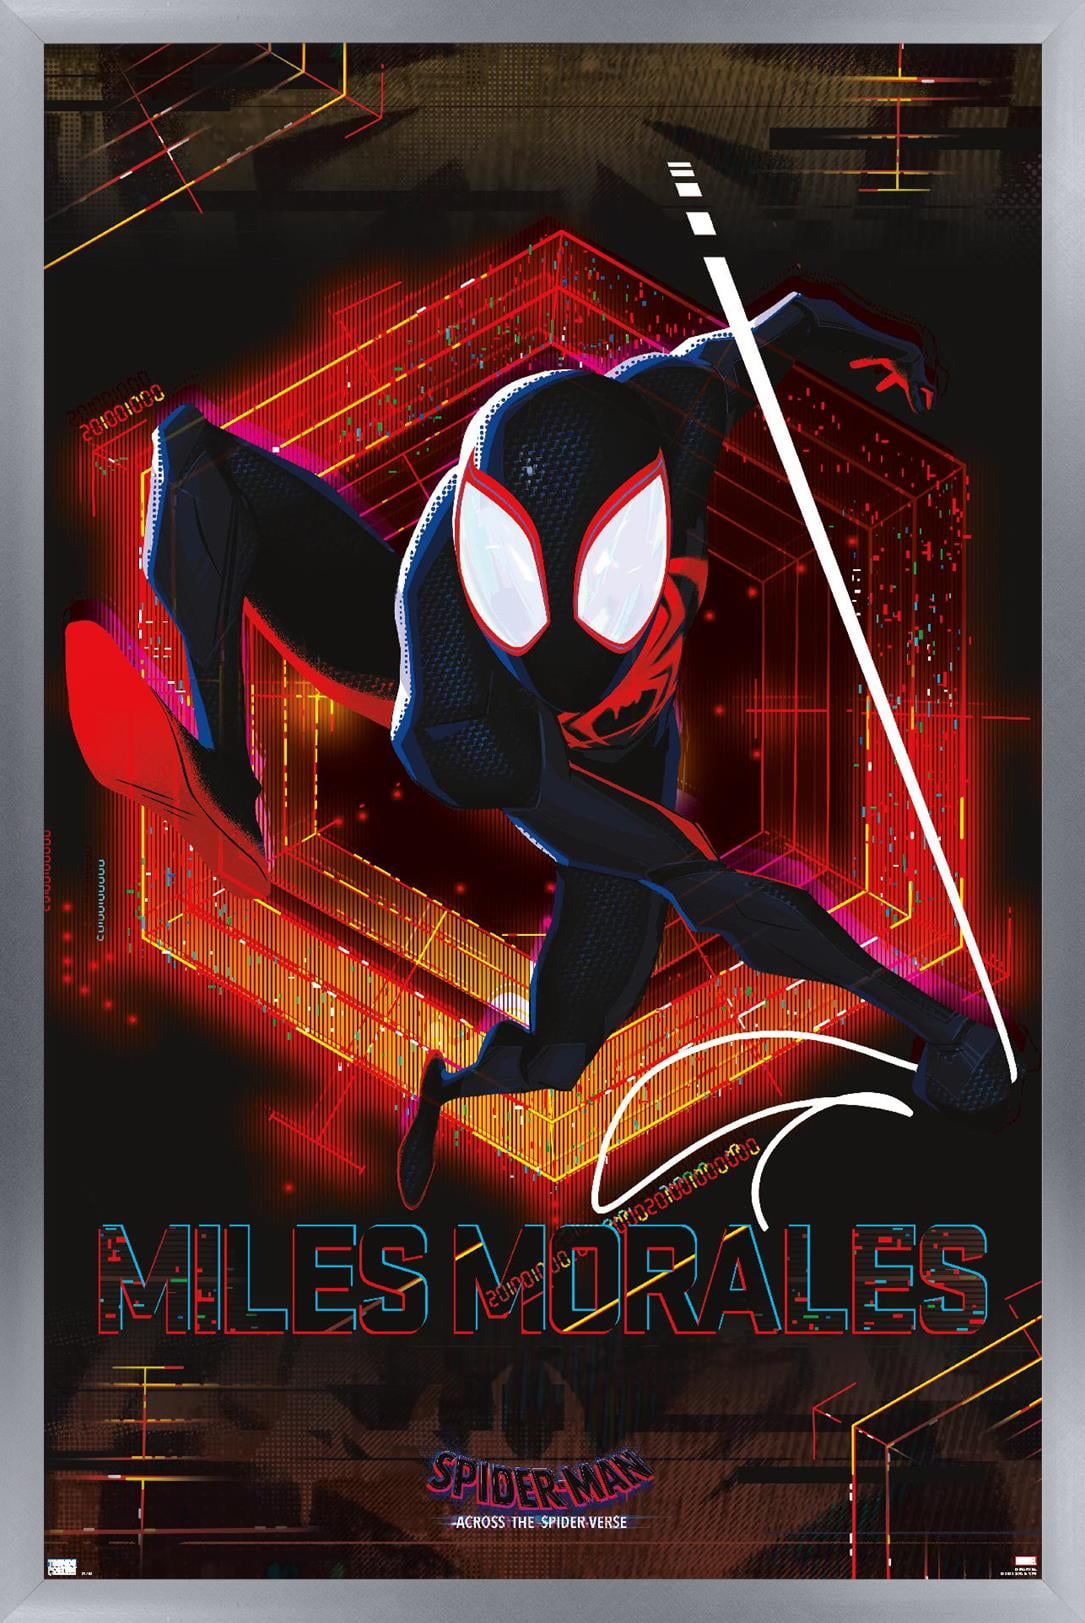 Spider Man Across The Spider-Verse Home Decor Poster Canvas